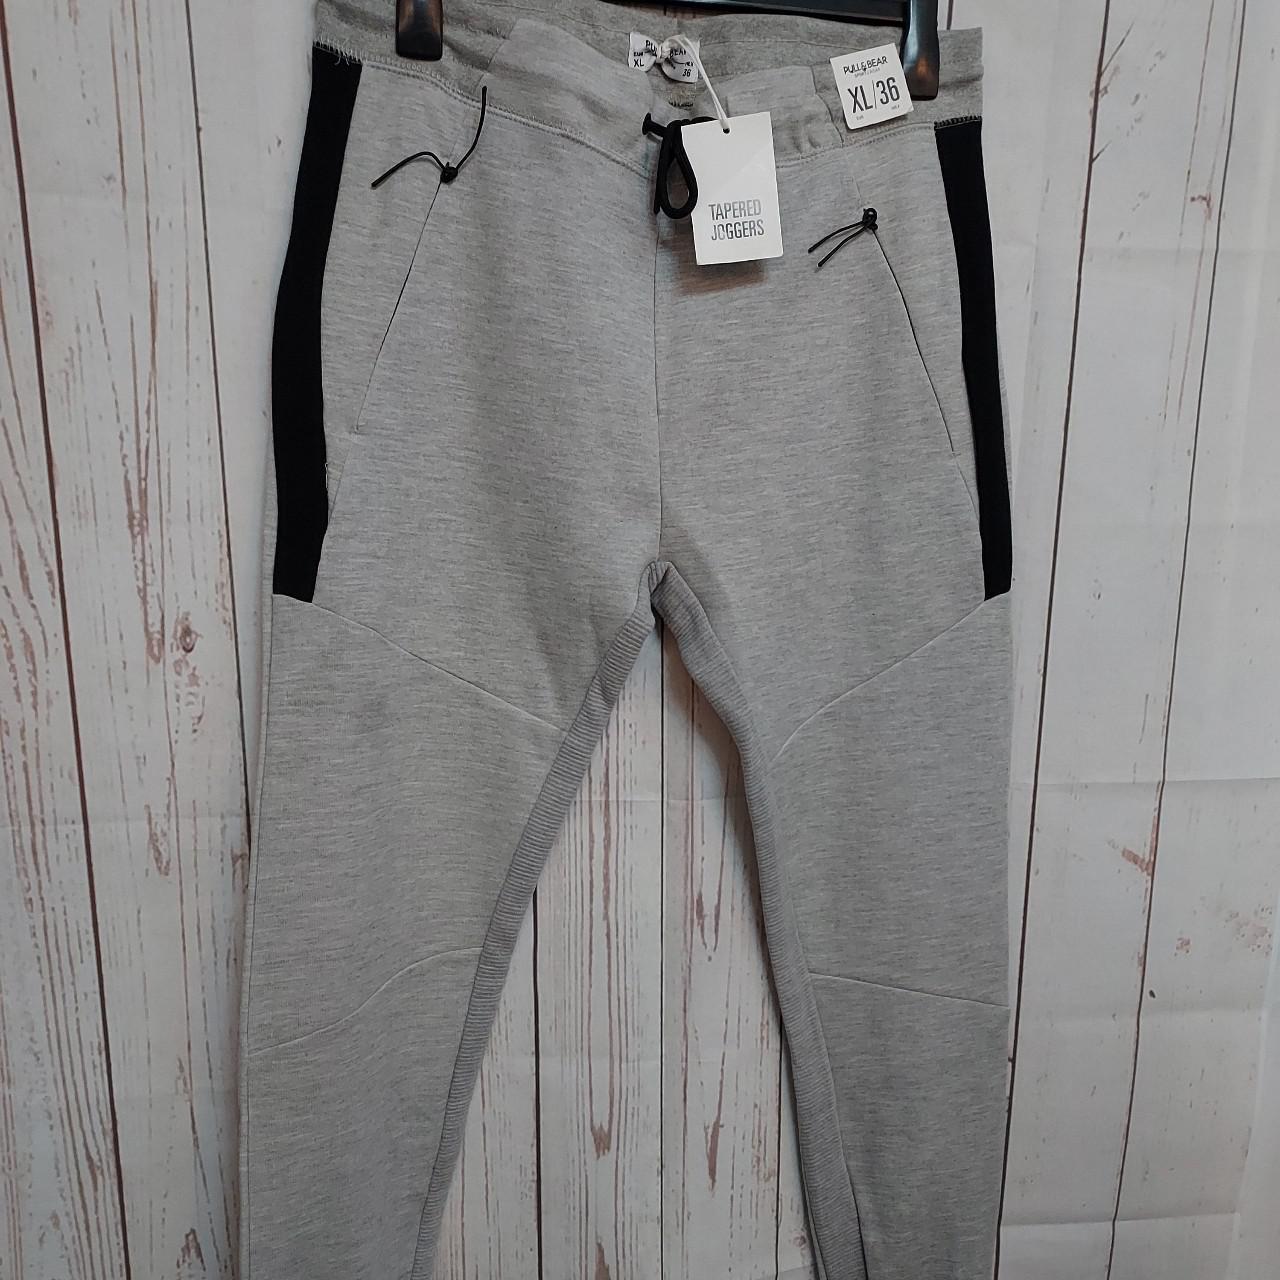 Pull&Bear Men's Grey and Black Joggers-tracksuits